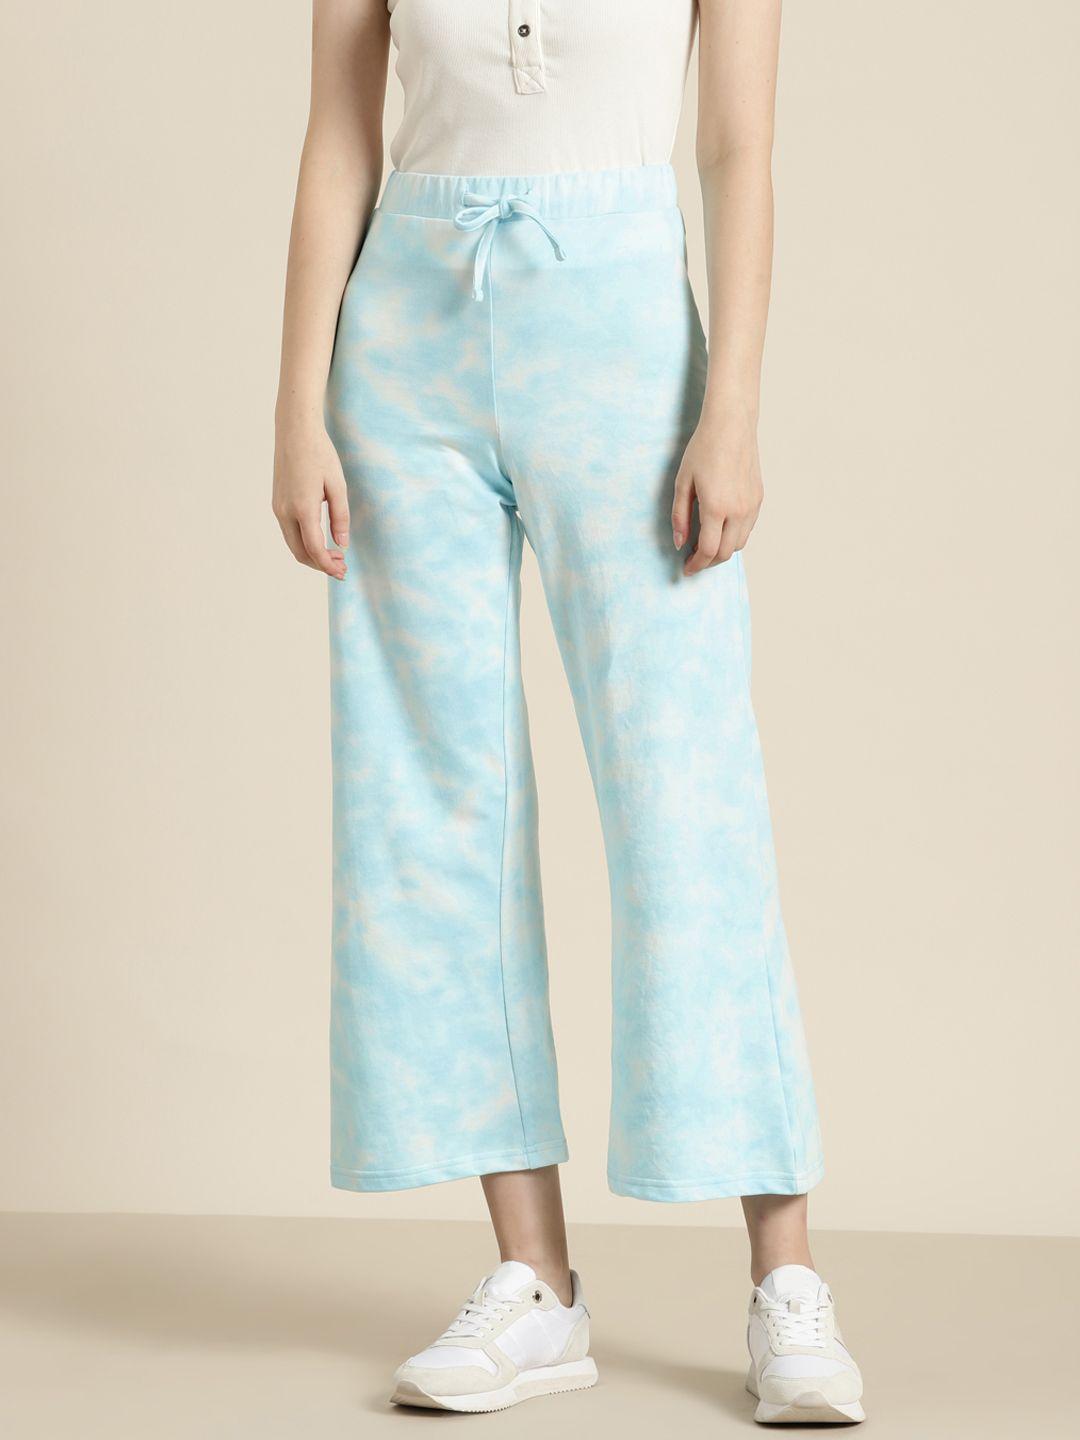 her by invictus women tie & dye cropped track pants